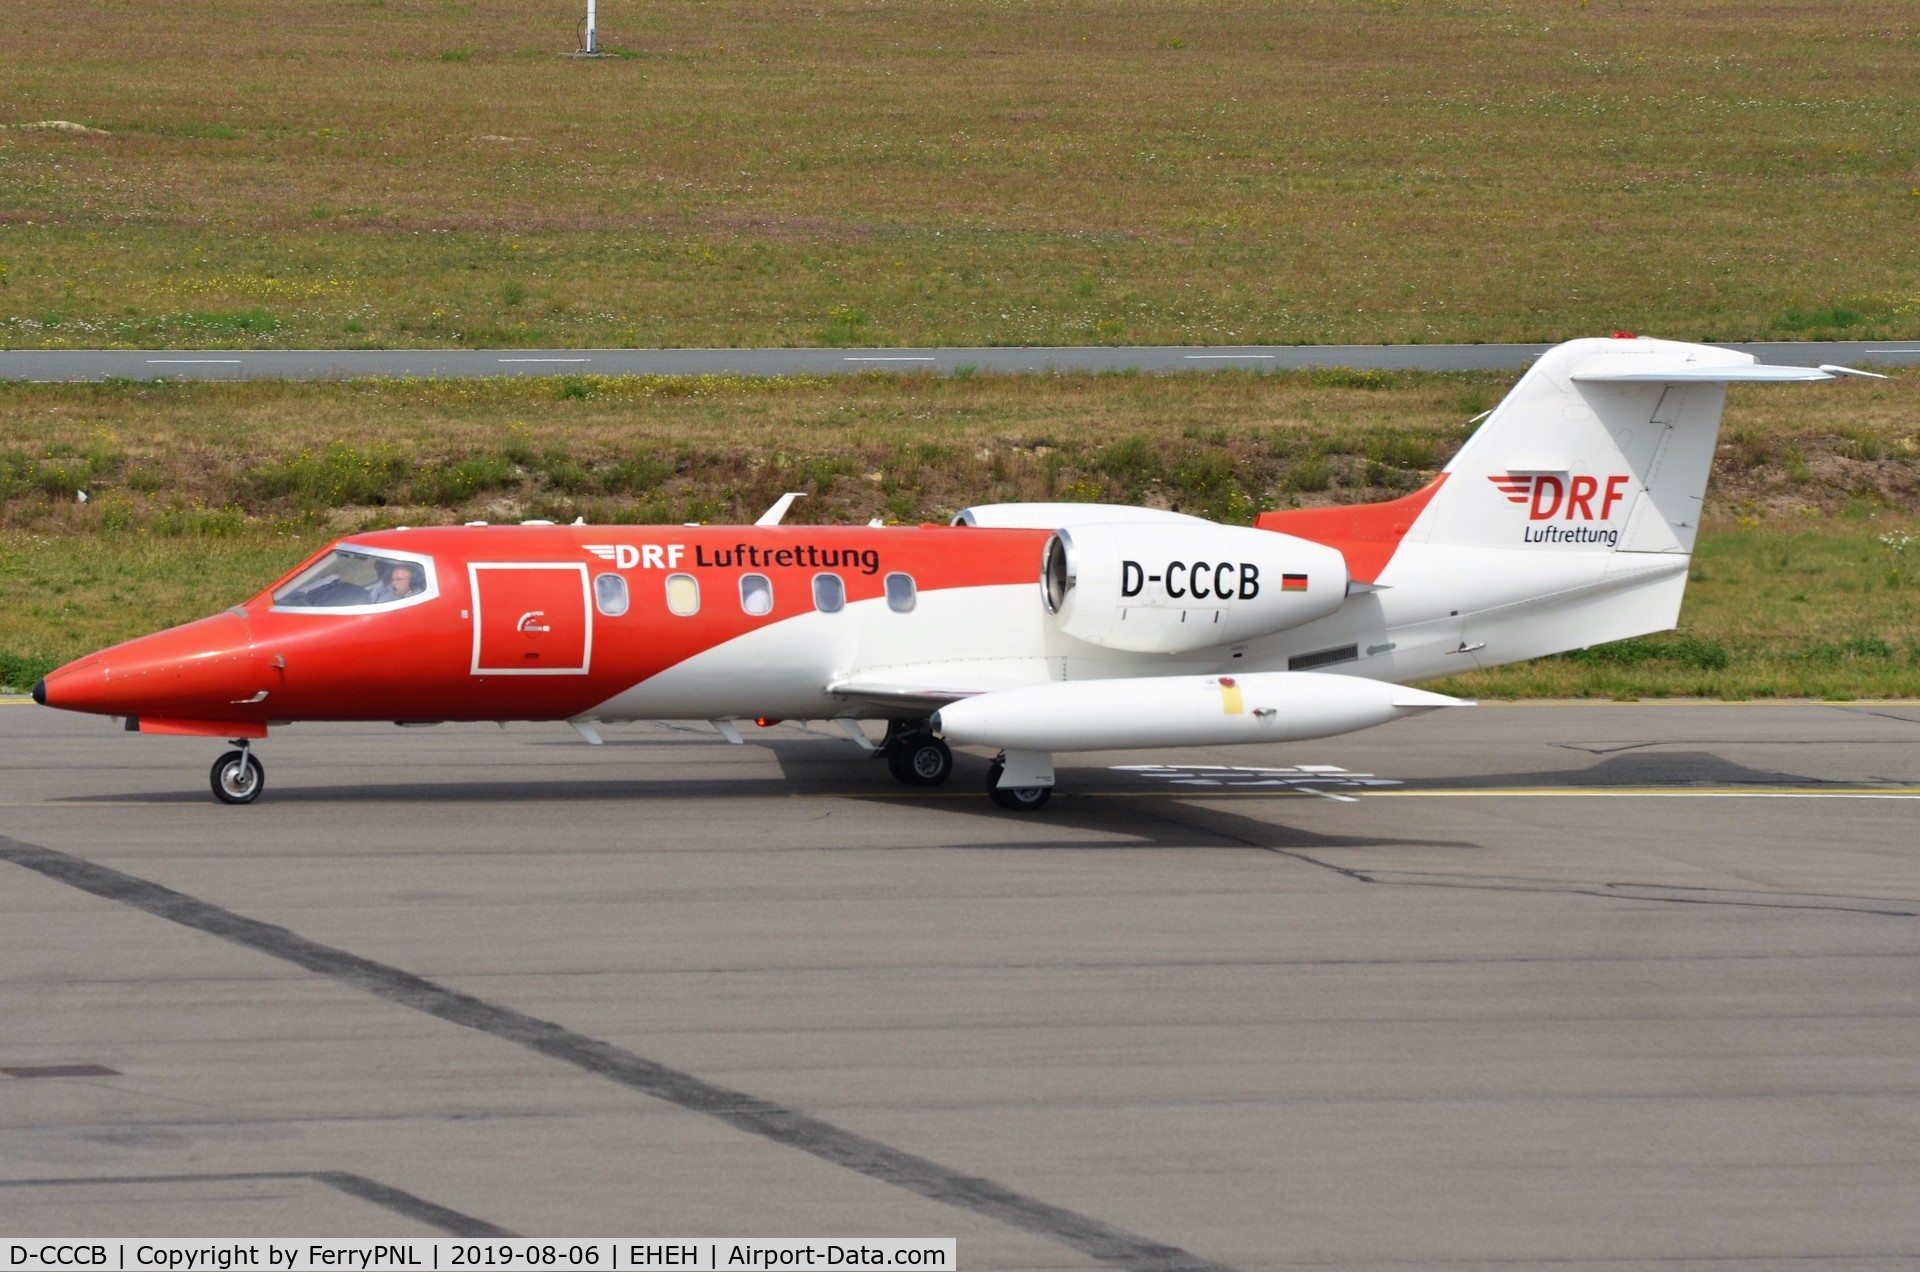 D-CCCB, 1990 Learjet 35A C/N 35A-663, DRF Air Ambulance arriving with a patient.